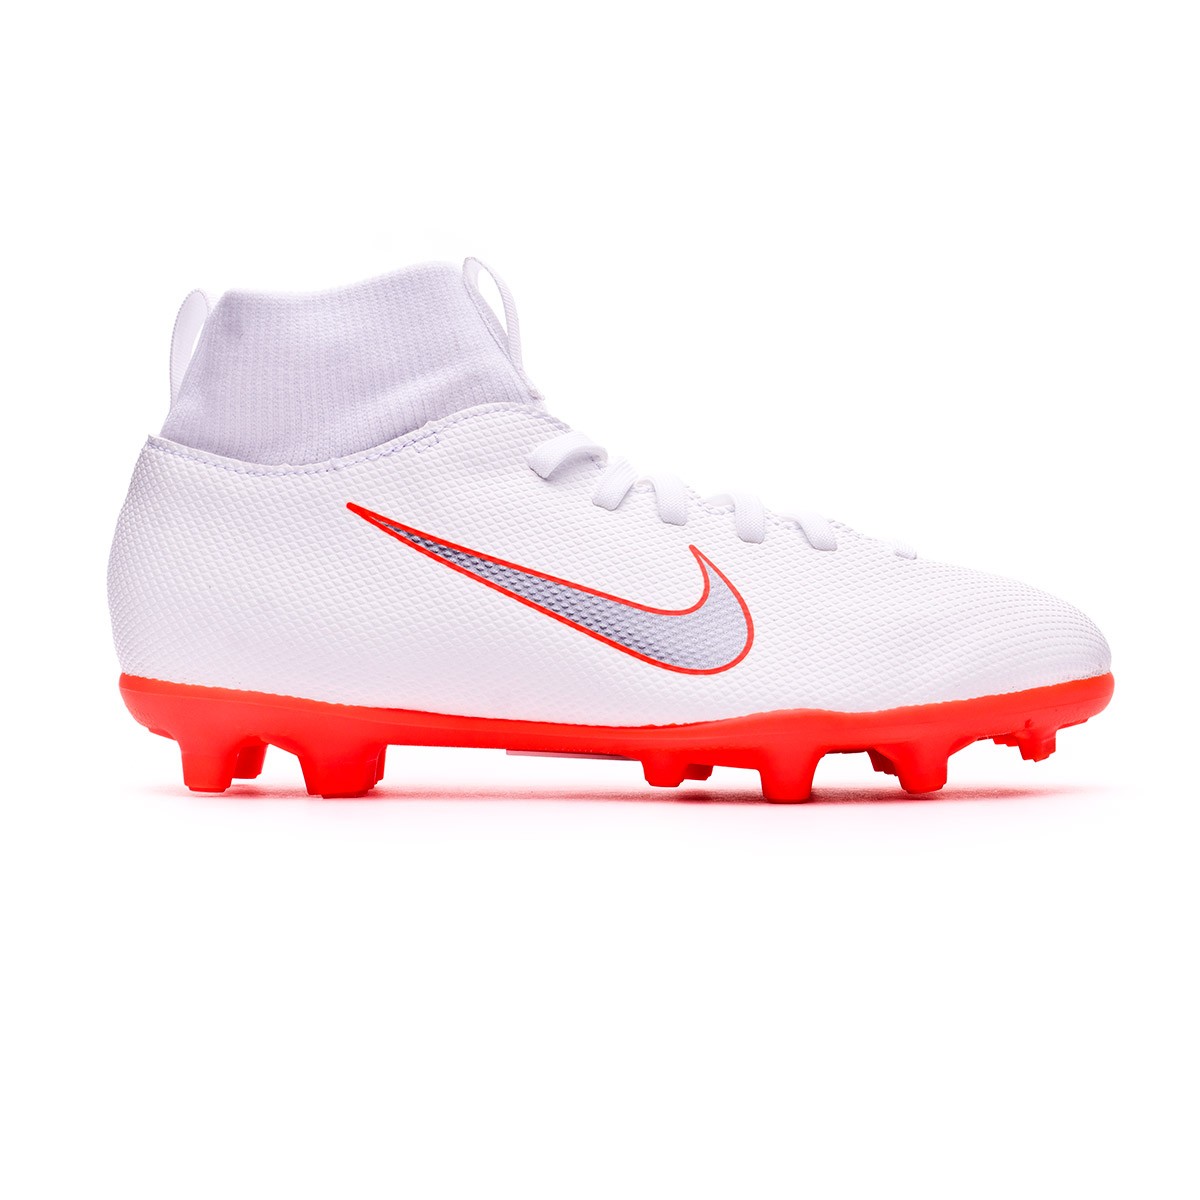 soccer boots for sale at total sports